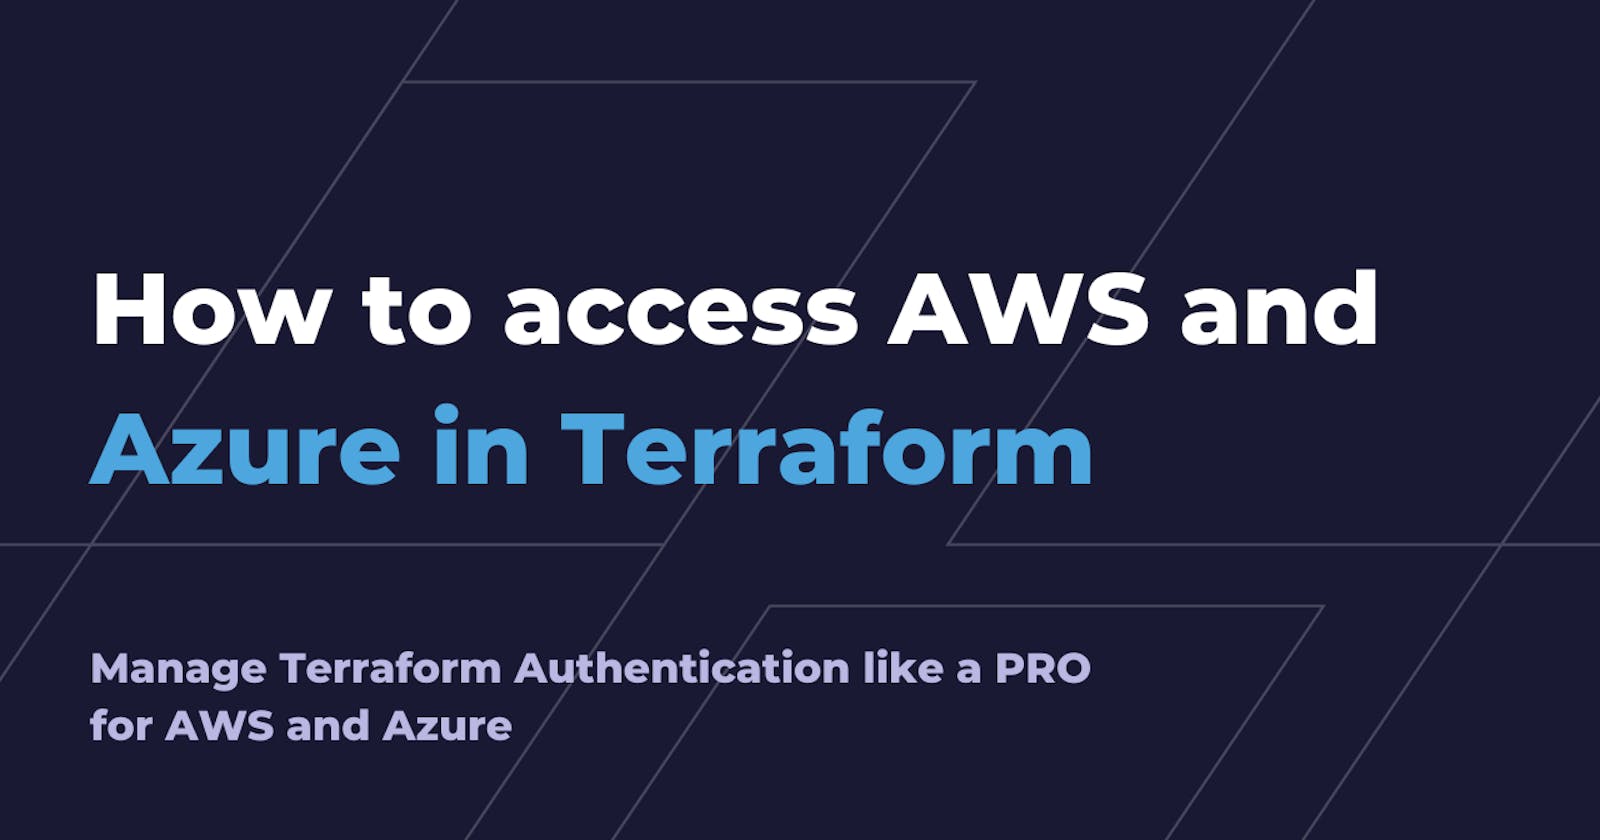 How to access AWS and Azure in Terraform